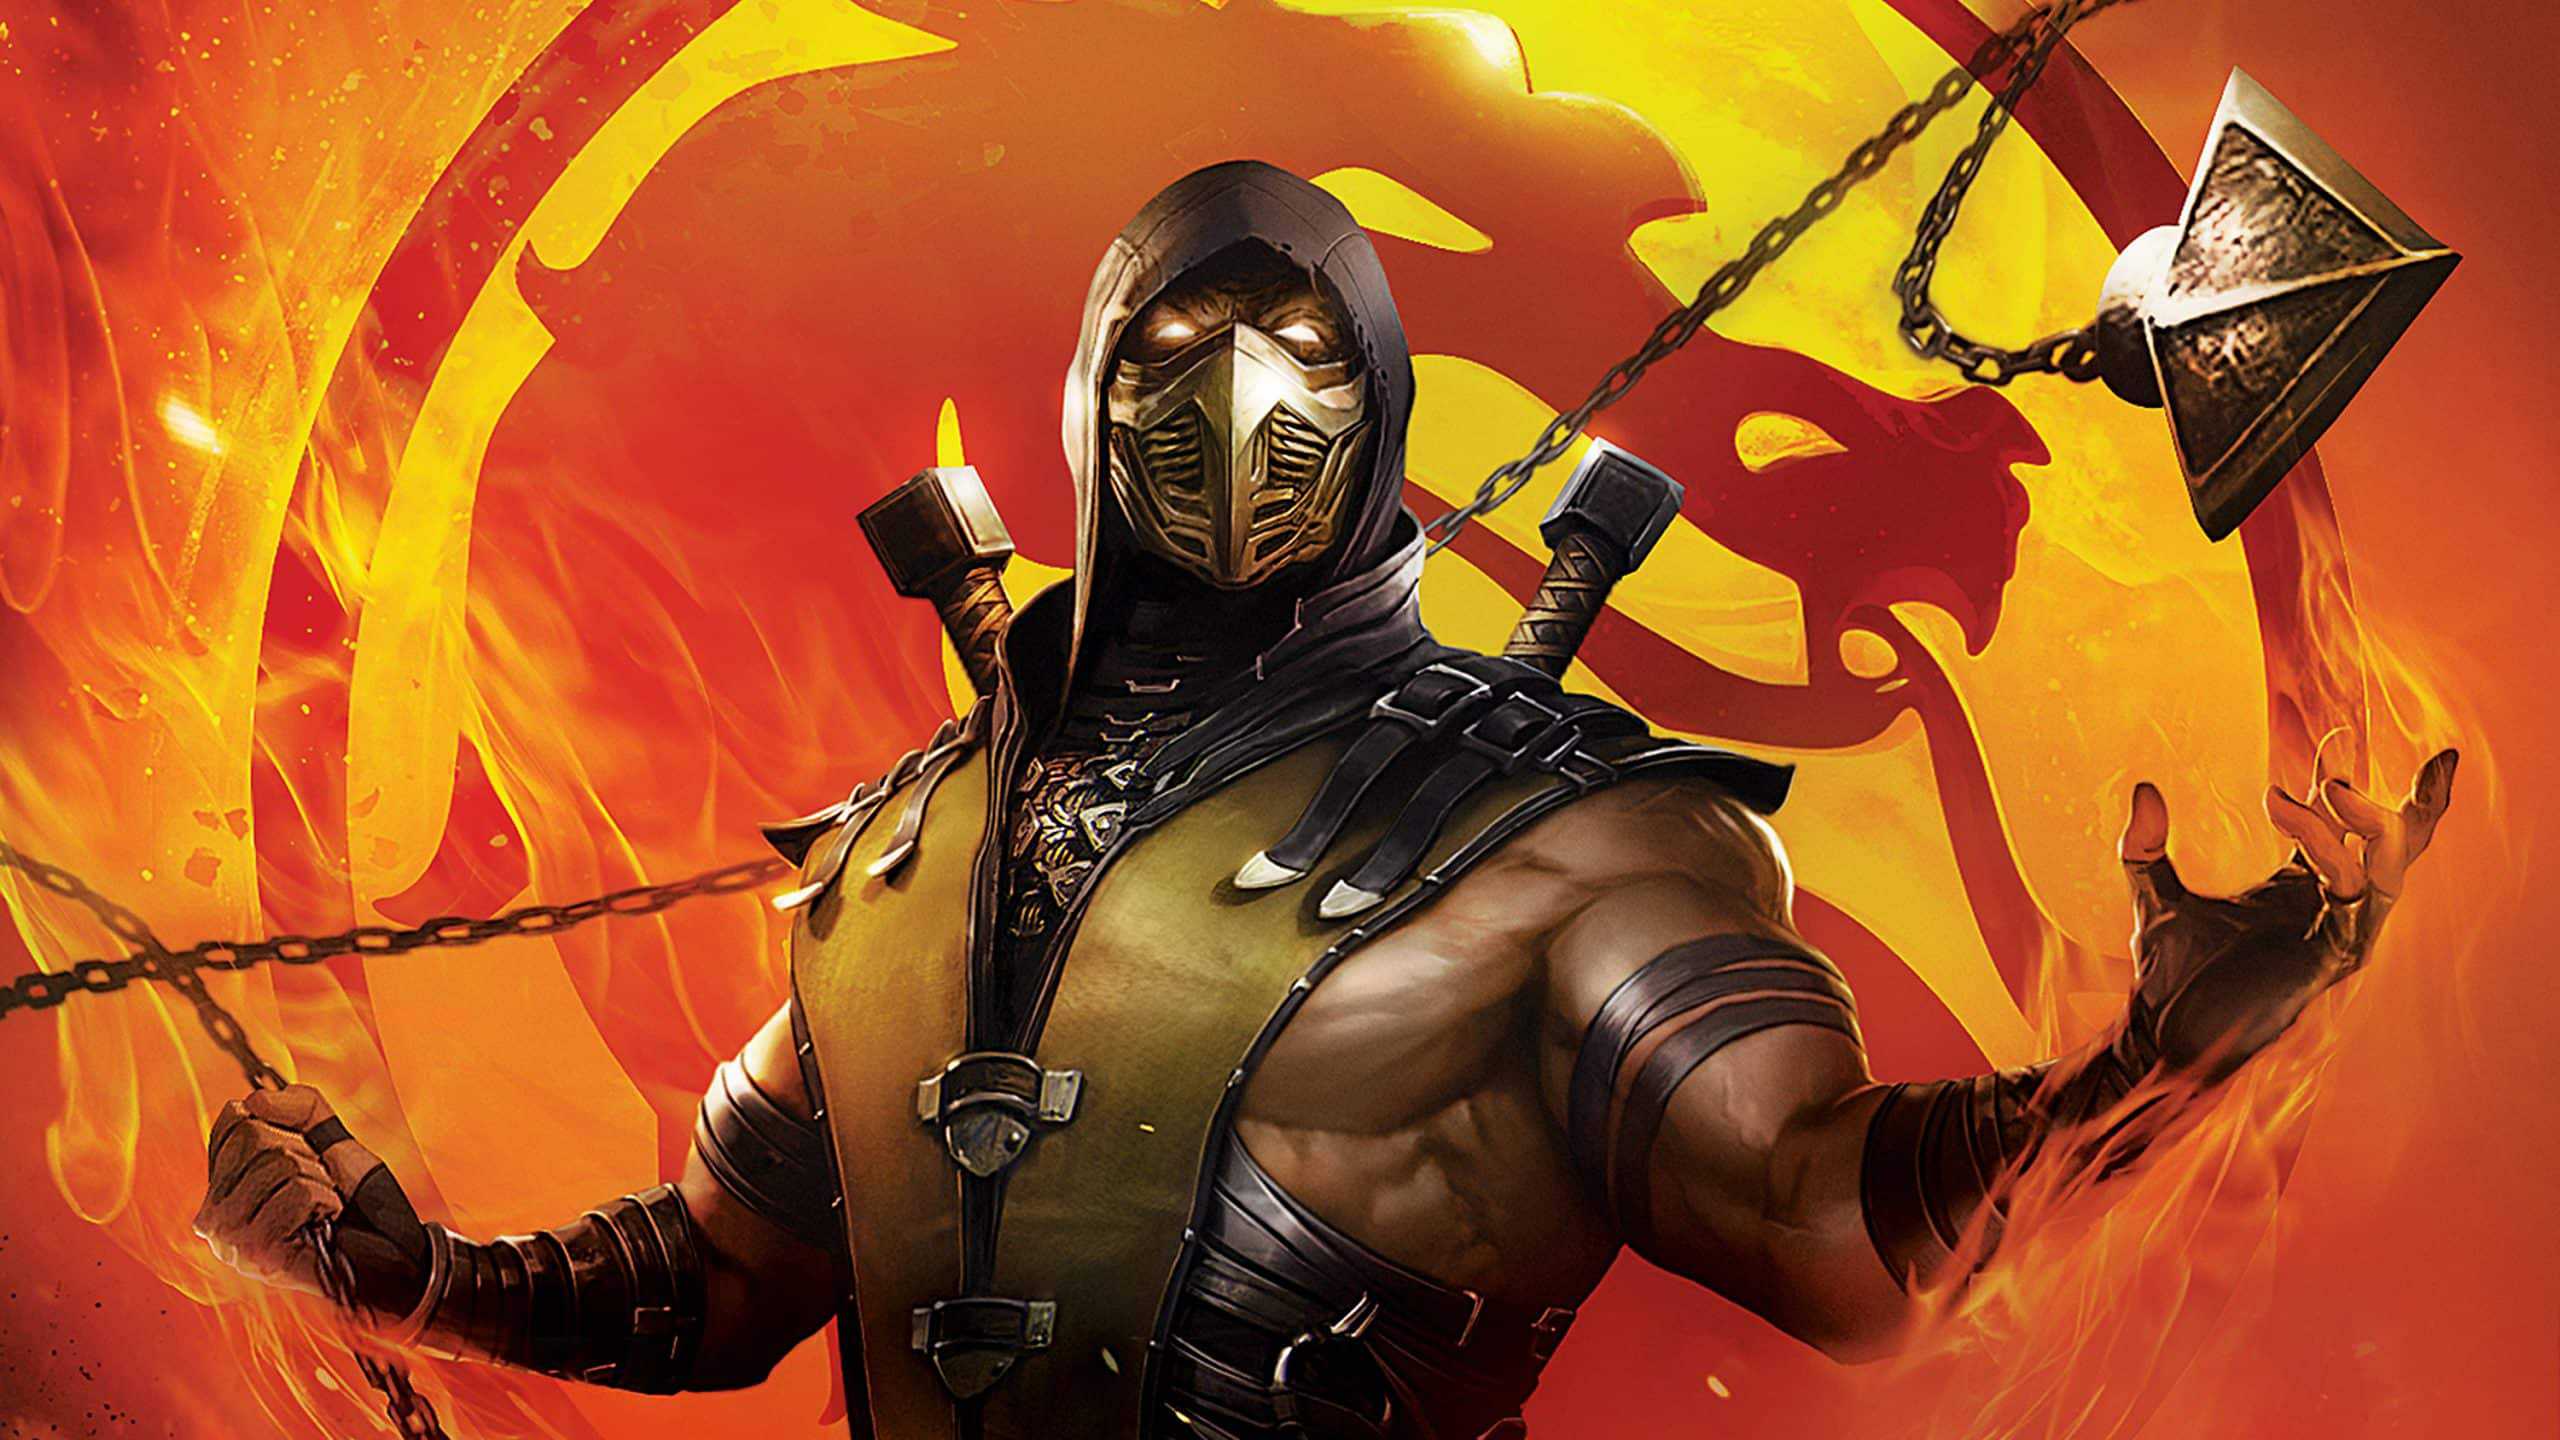 Mortal Kombat 12 Is About To Change The Franchise Forever